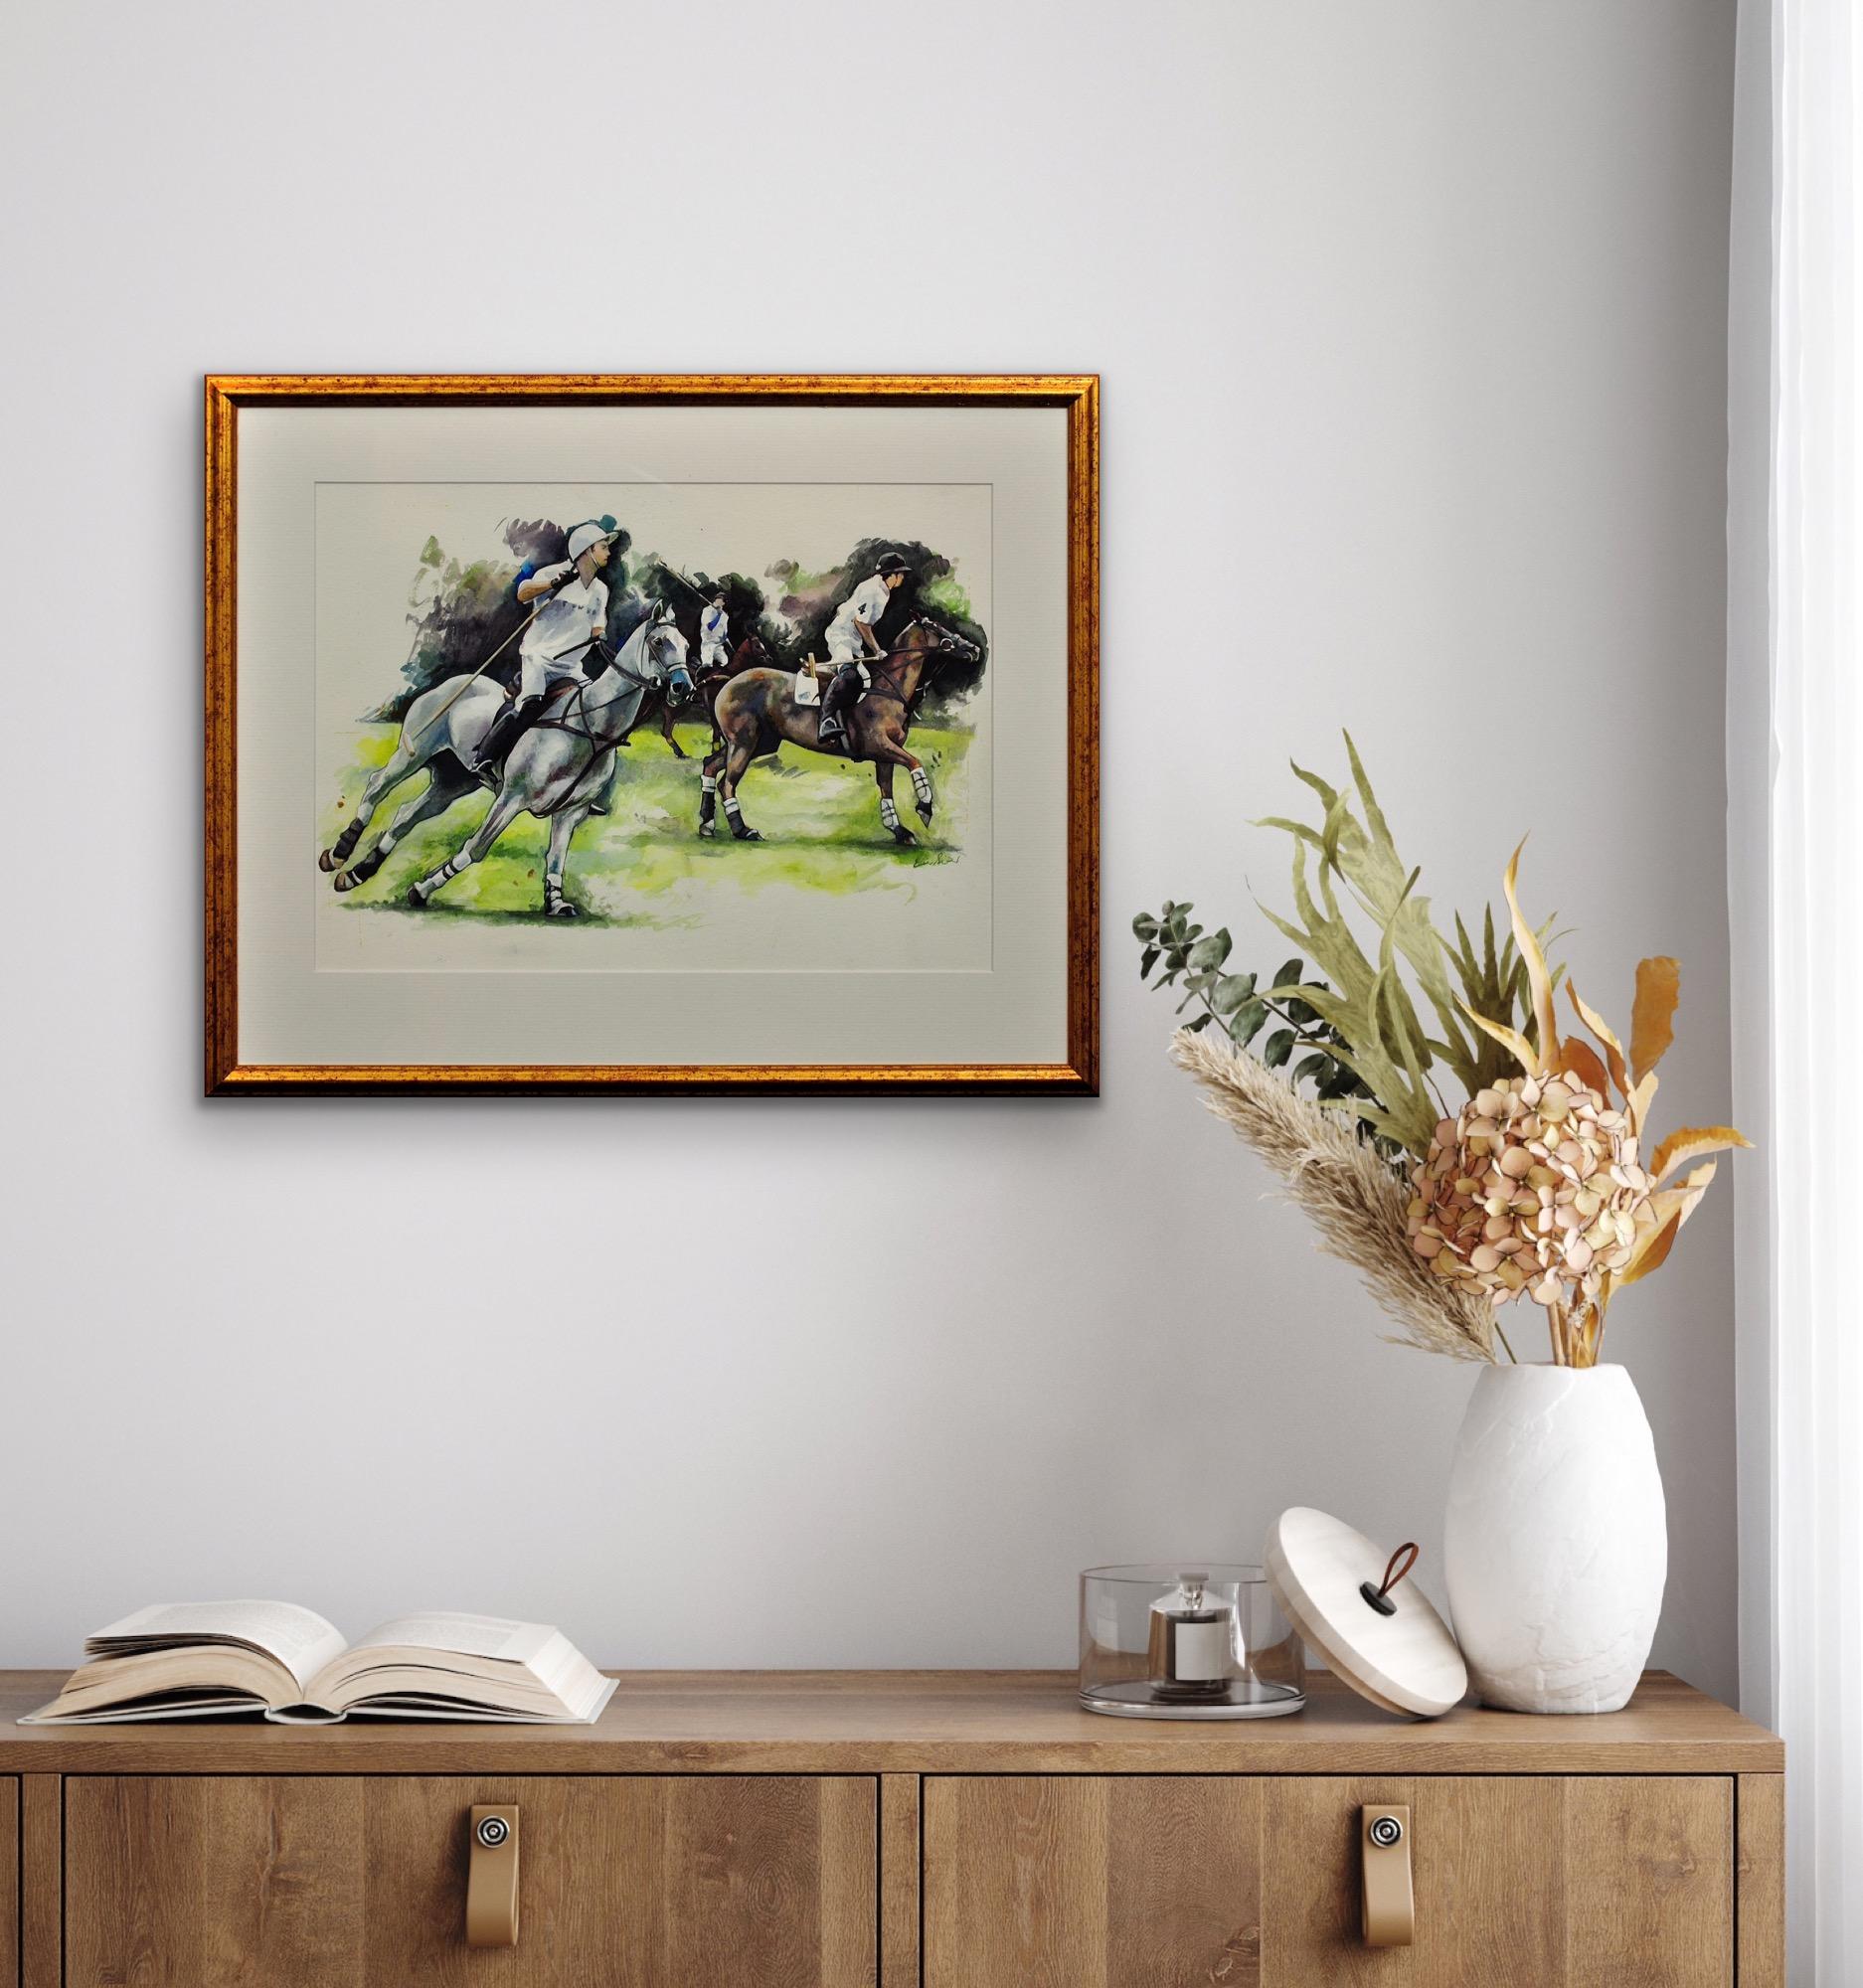 Polo Match, Cirencester, The First Chukka. Cotswolds. Parkland.Framed Watercolor For Sale 10